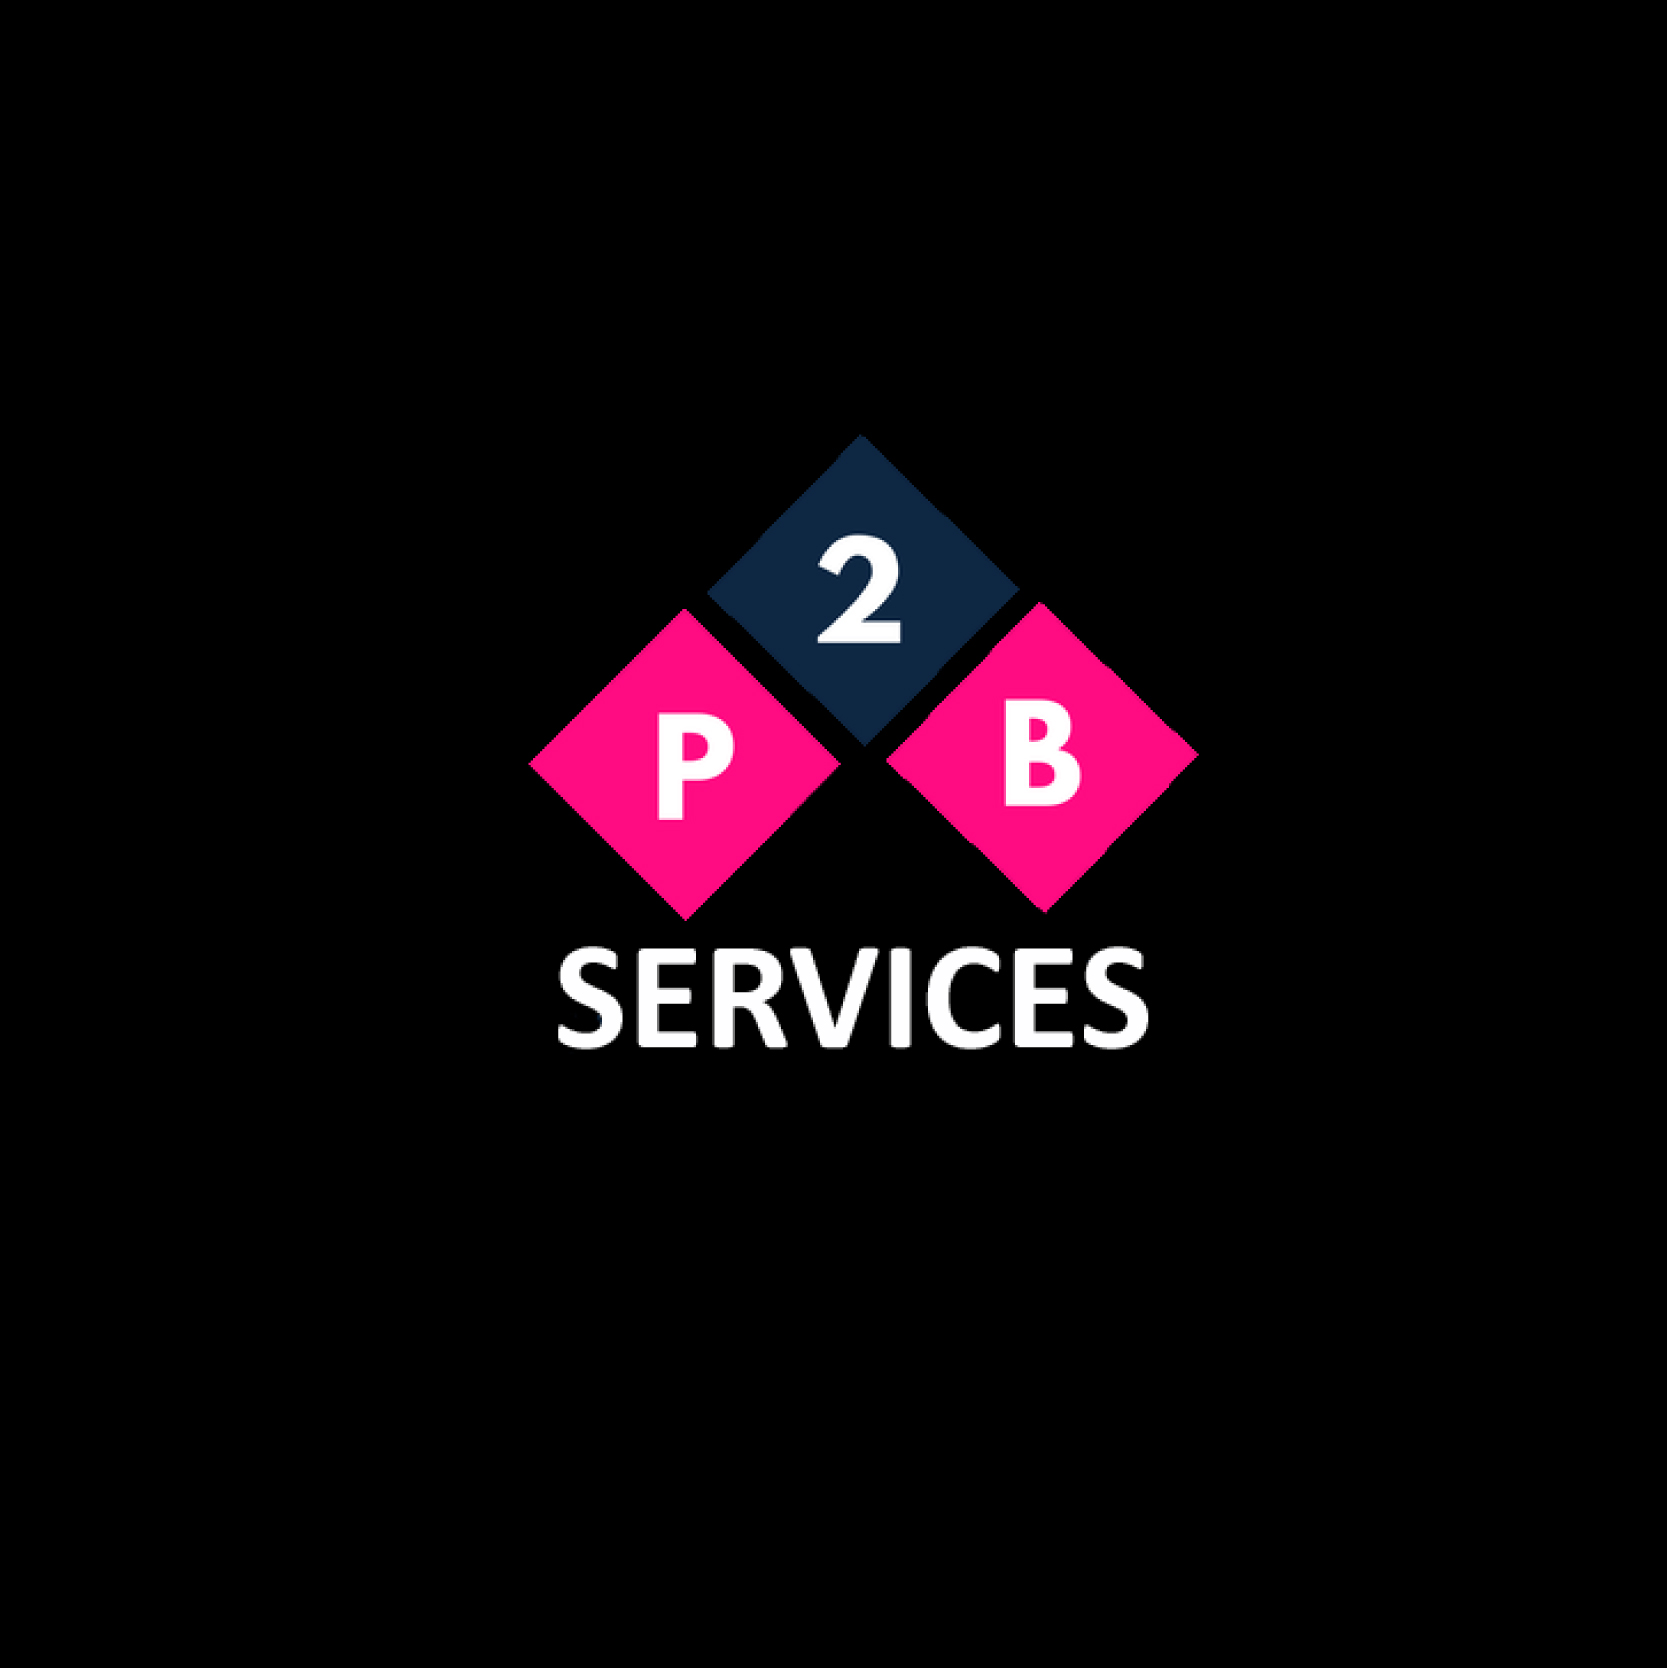 Point to Business Services